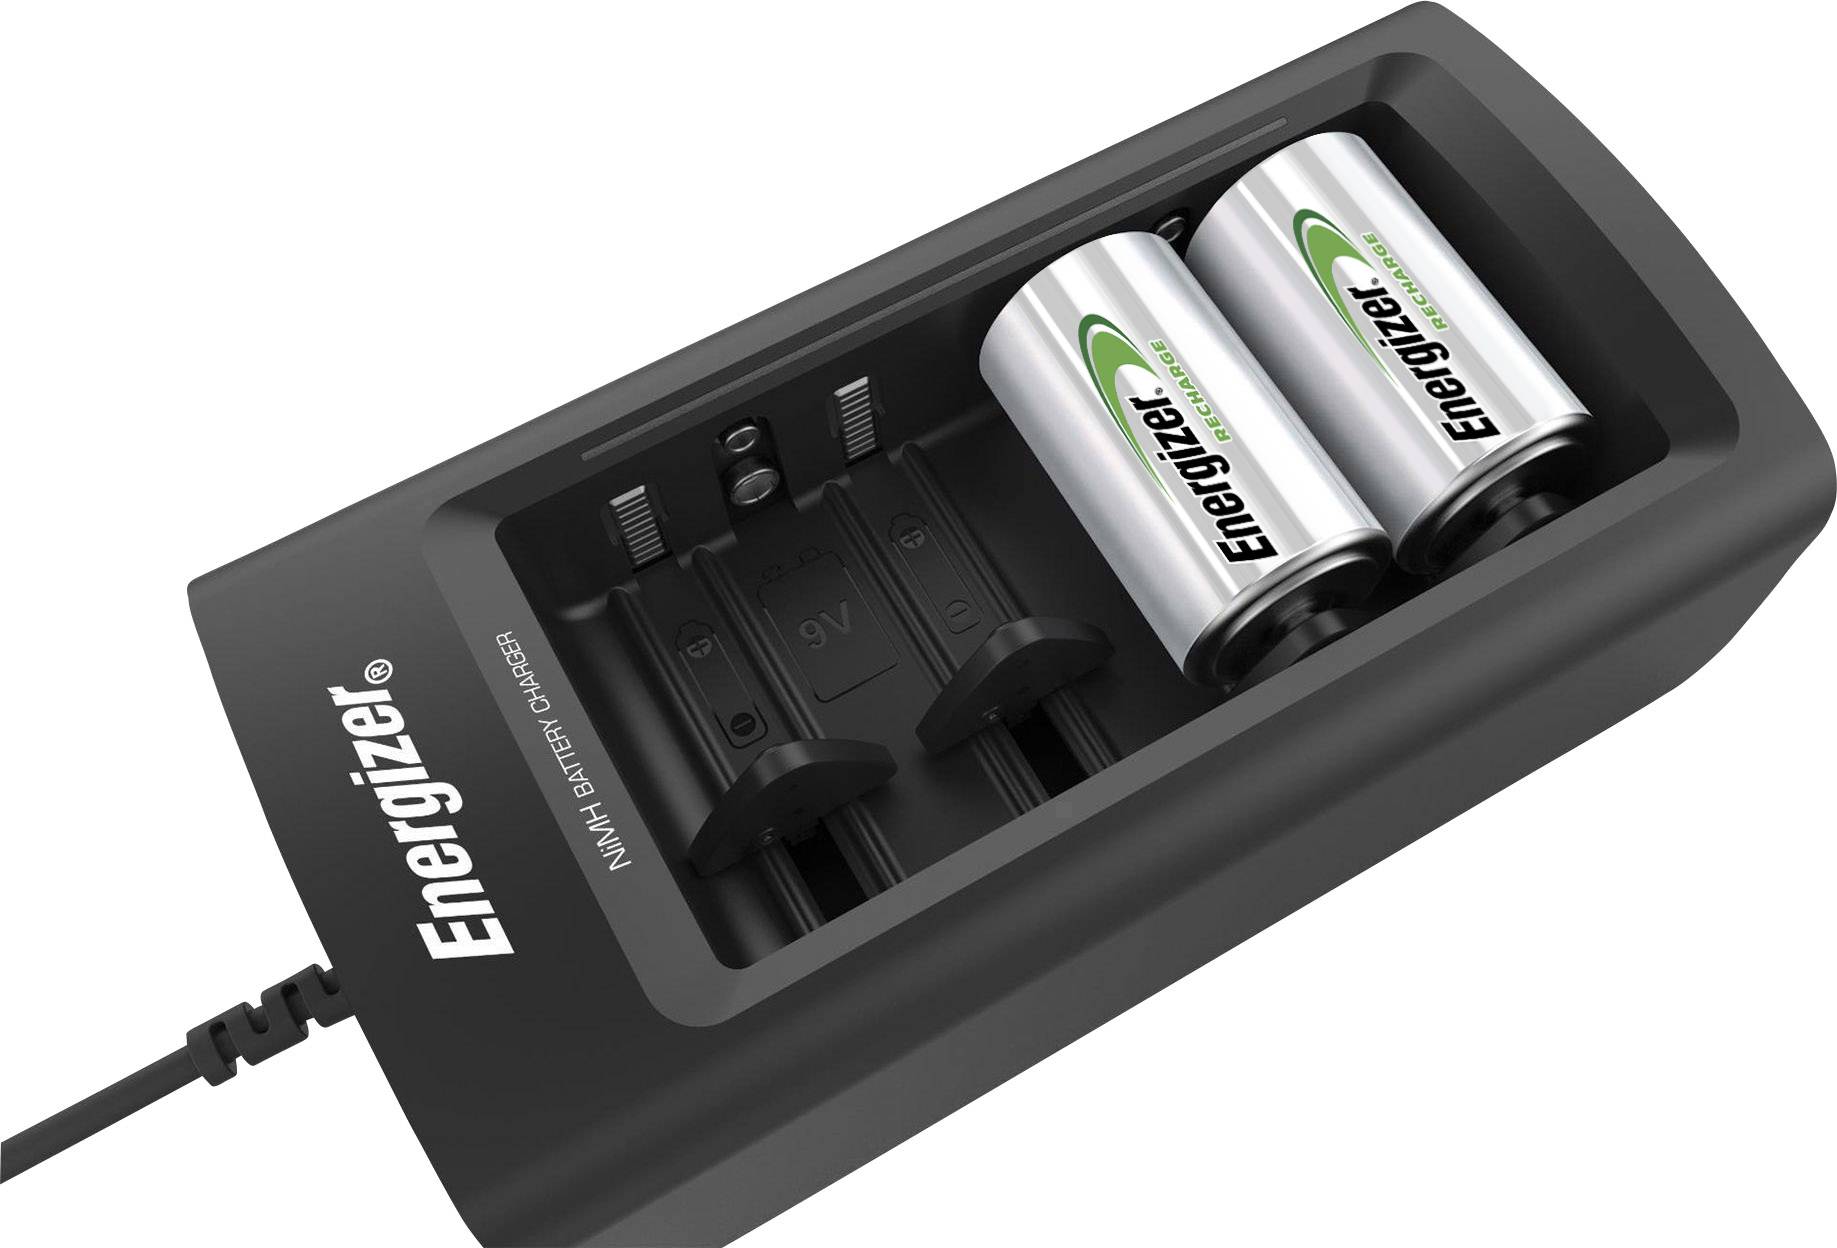 Energizer Recharge Universal Battery Charger 